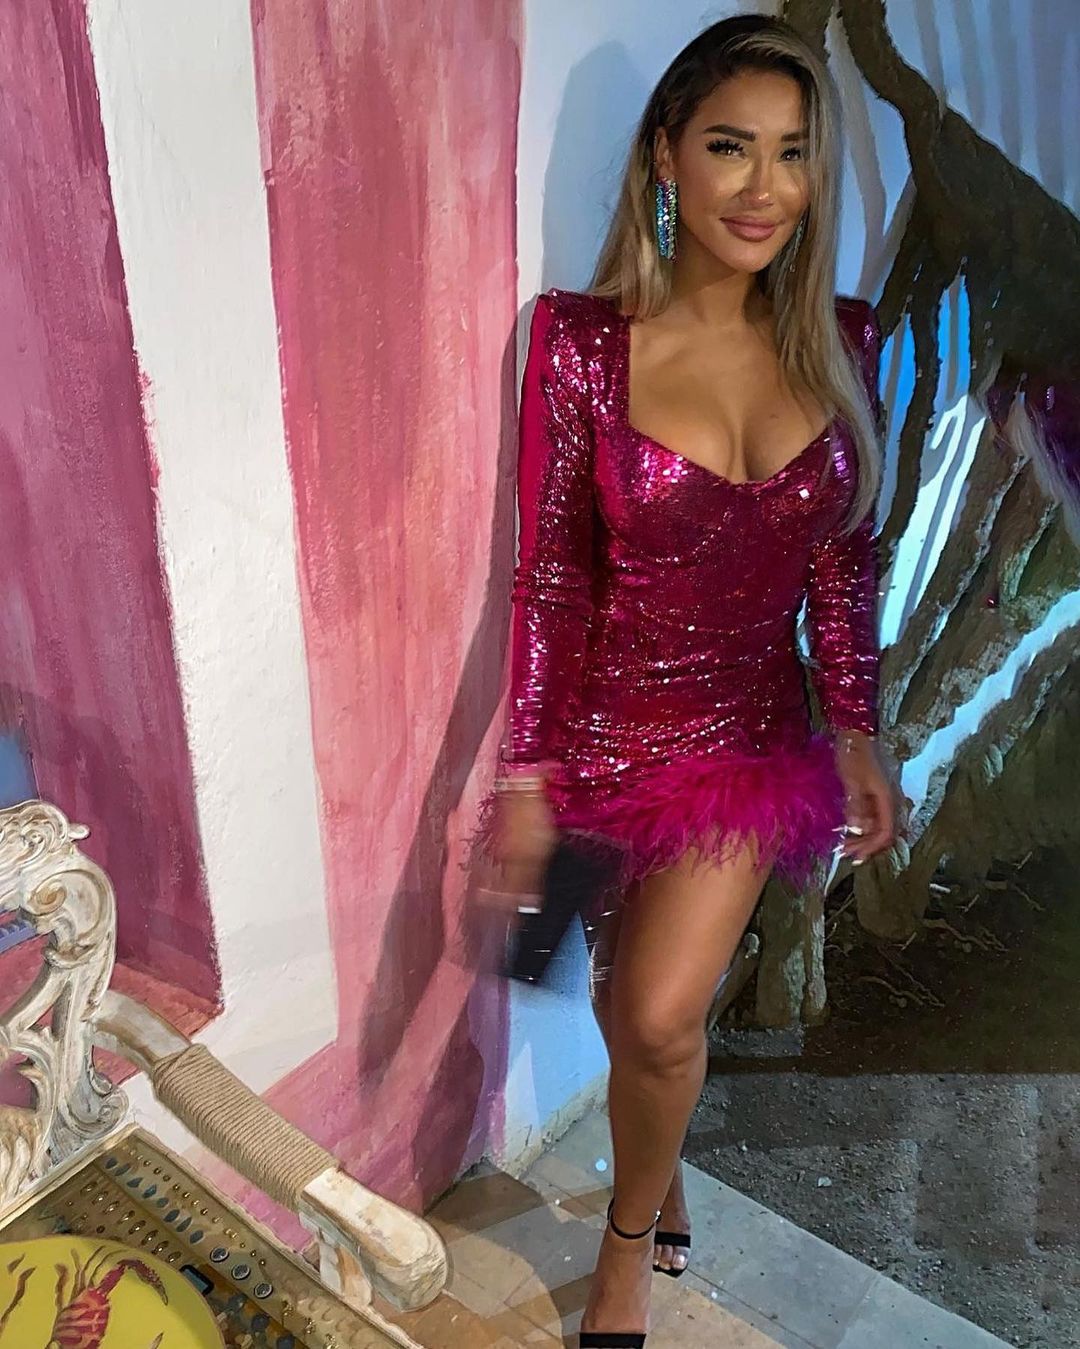 hot pink sparkly dress